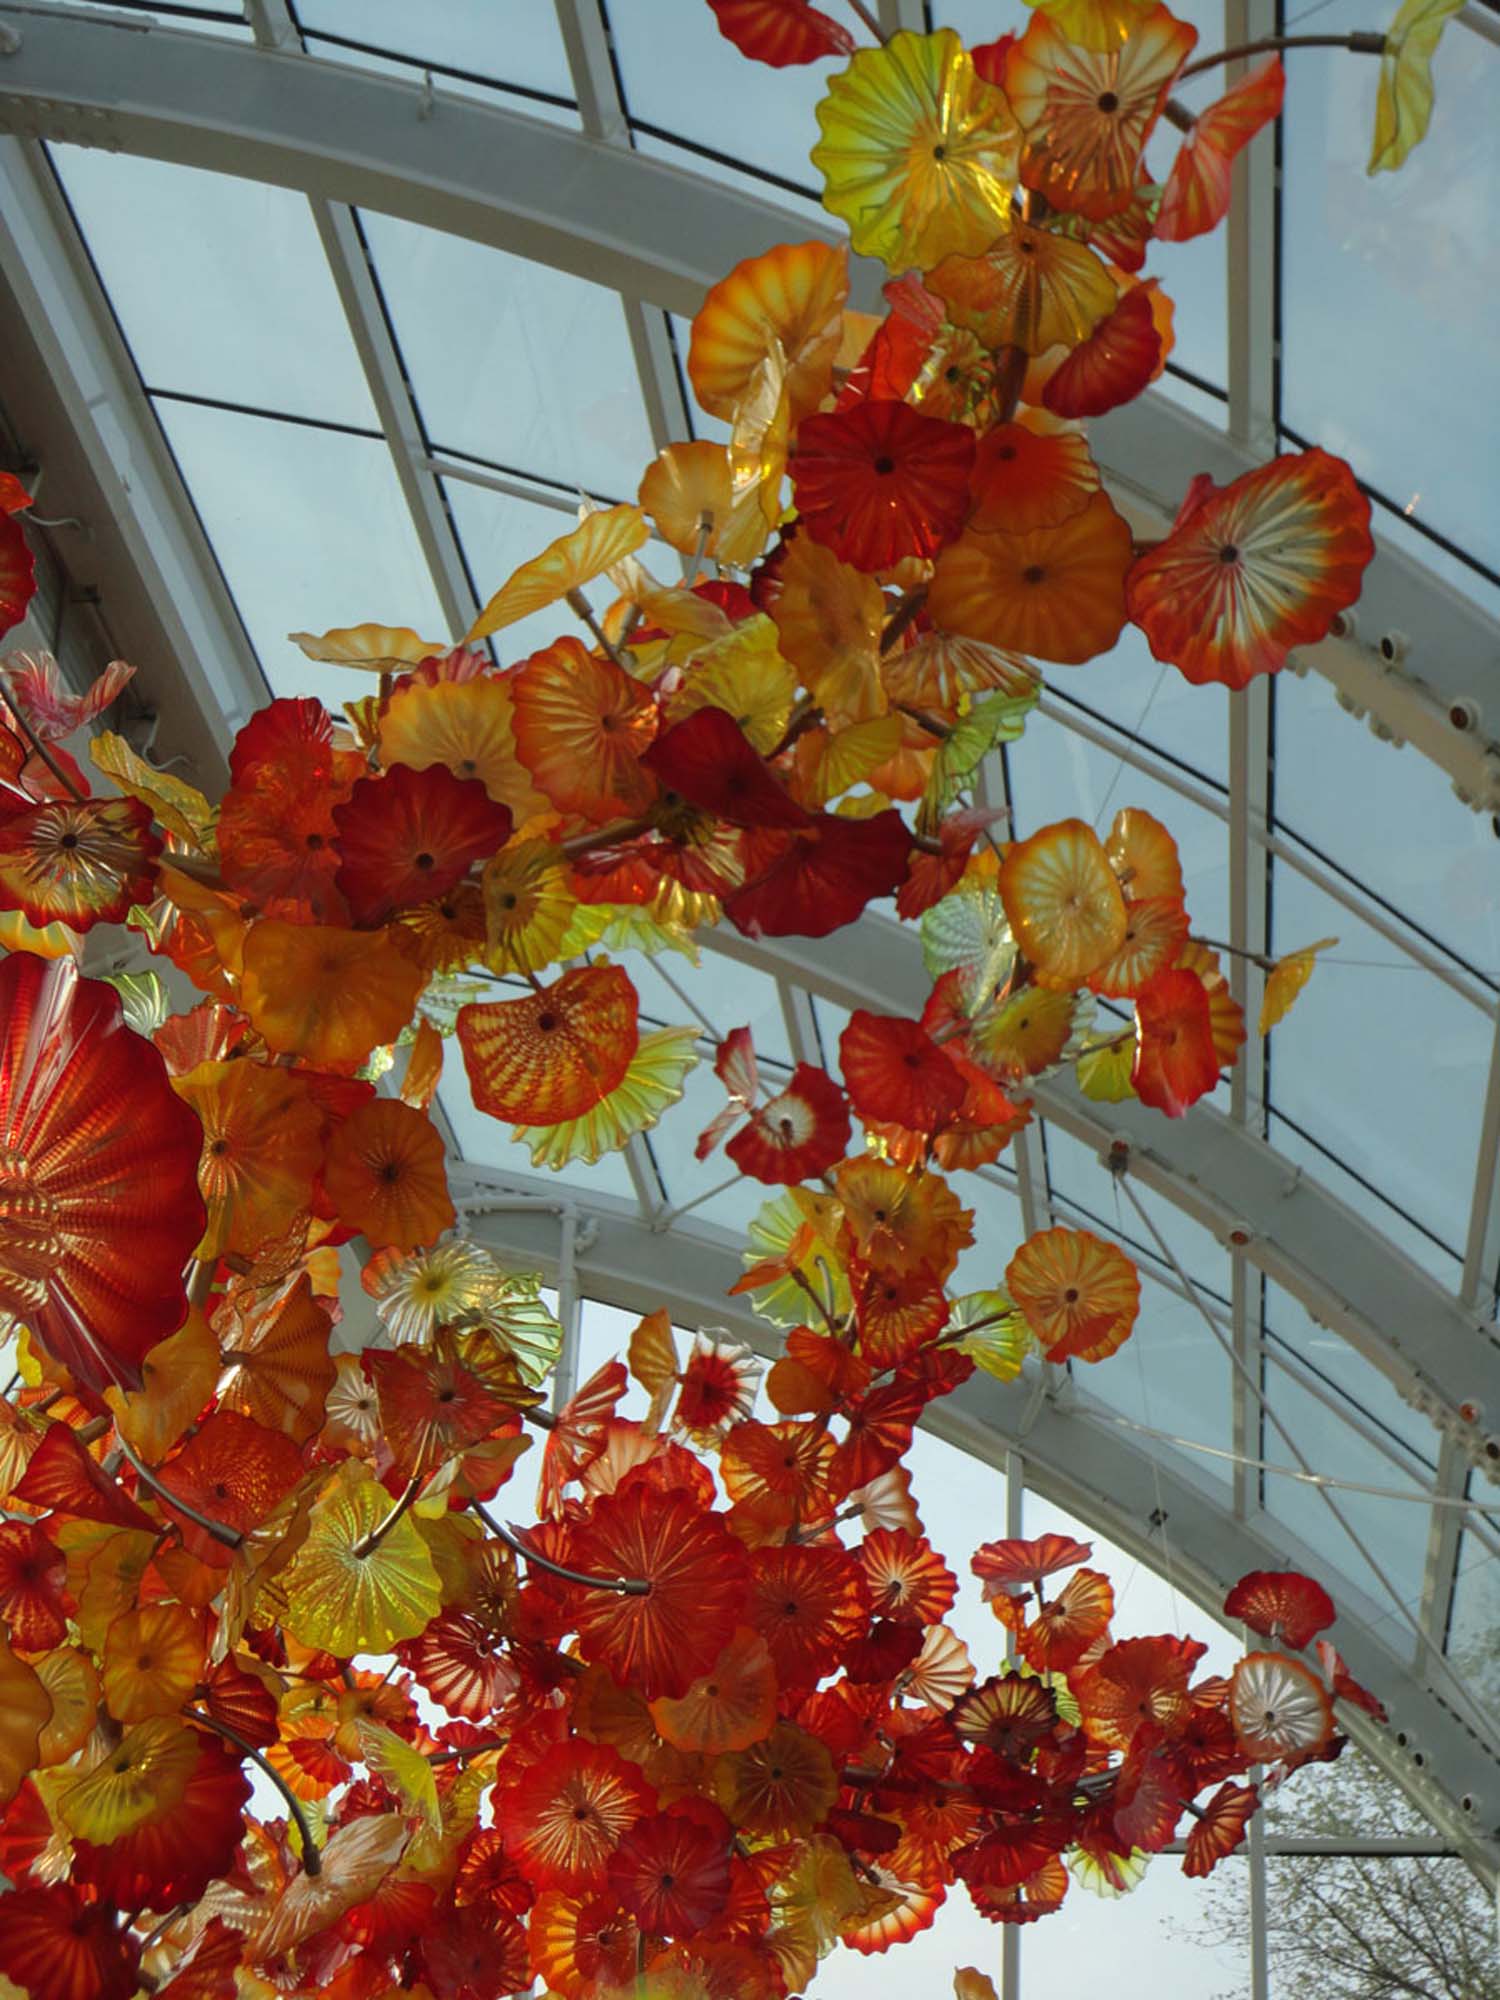 CHIHULY GARDEN + GLASS